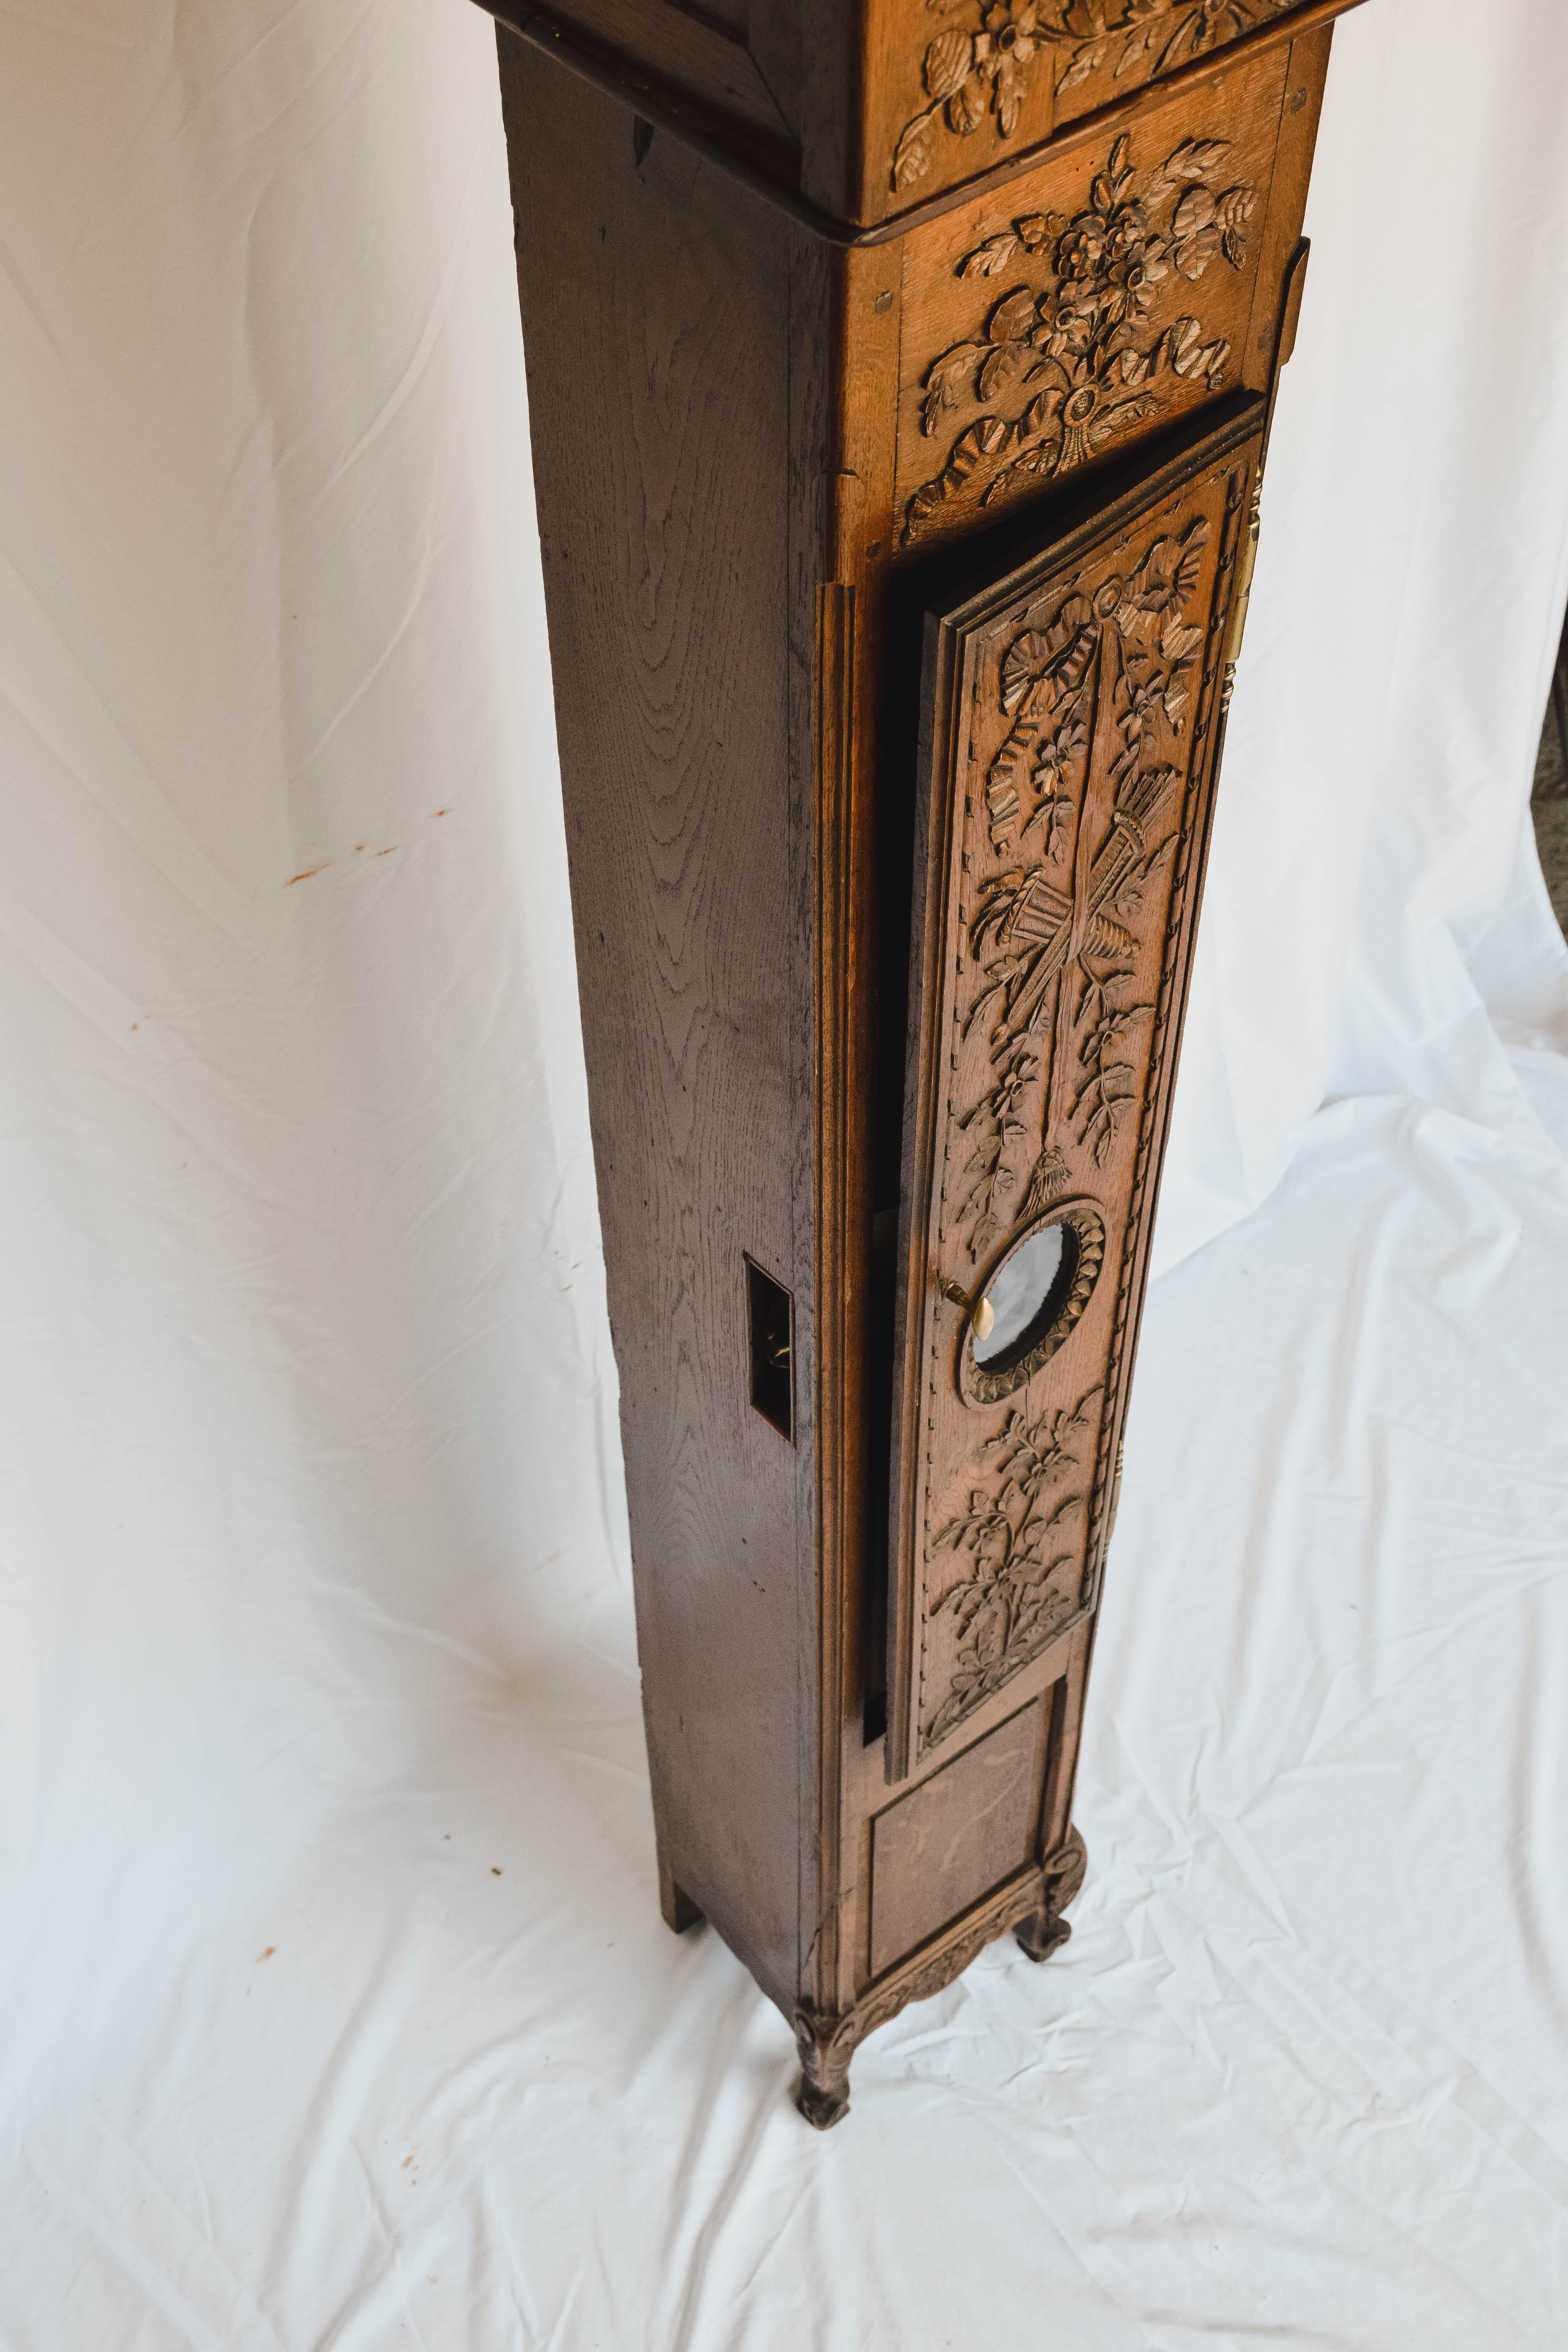 Superb Carved 18th c French Lantern Clock Case with Movement 4